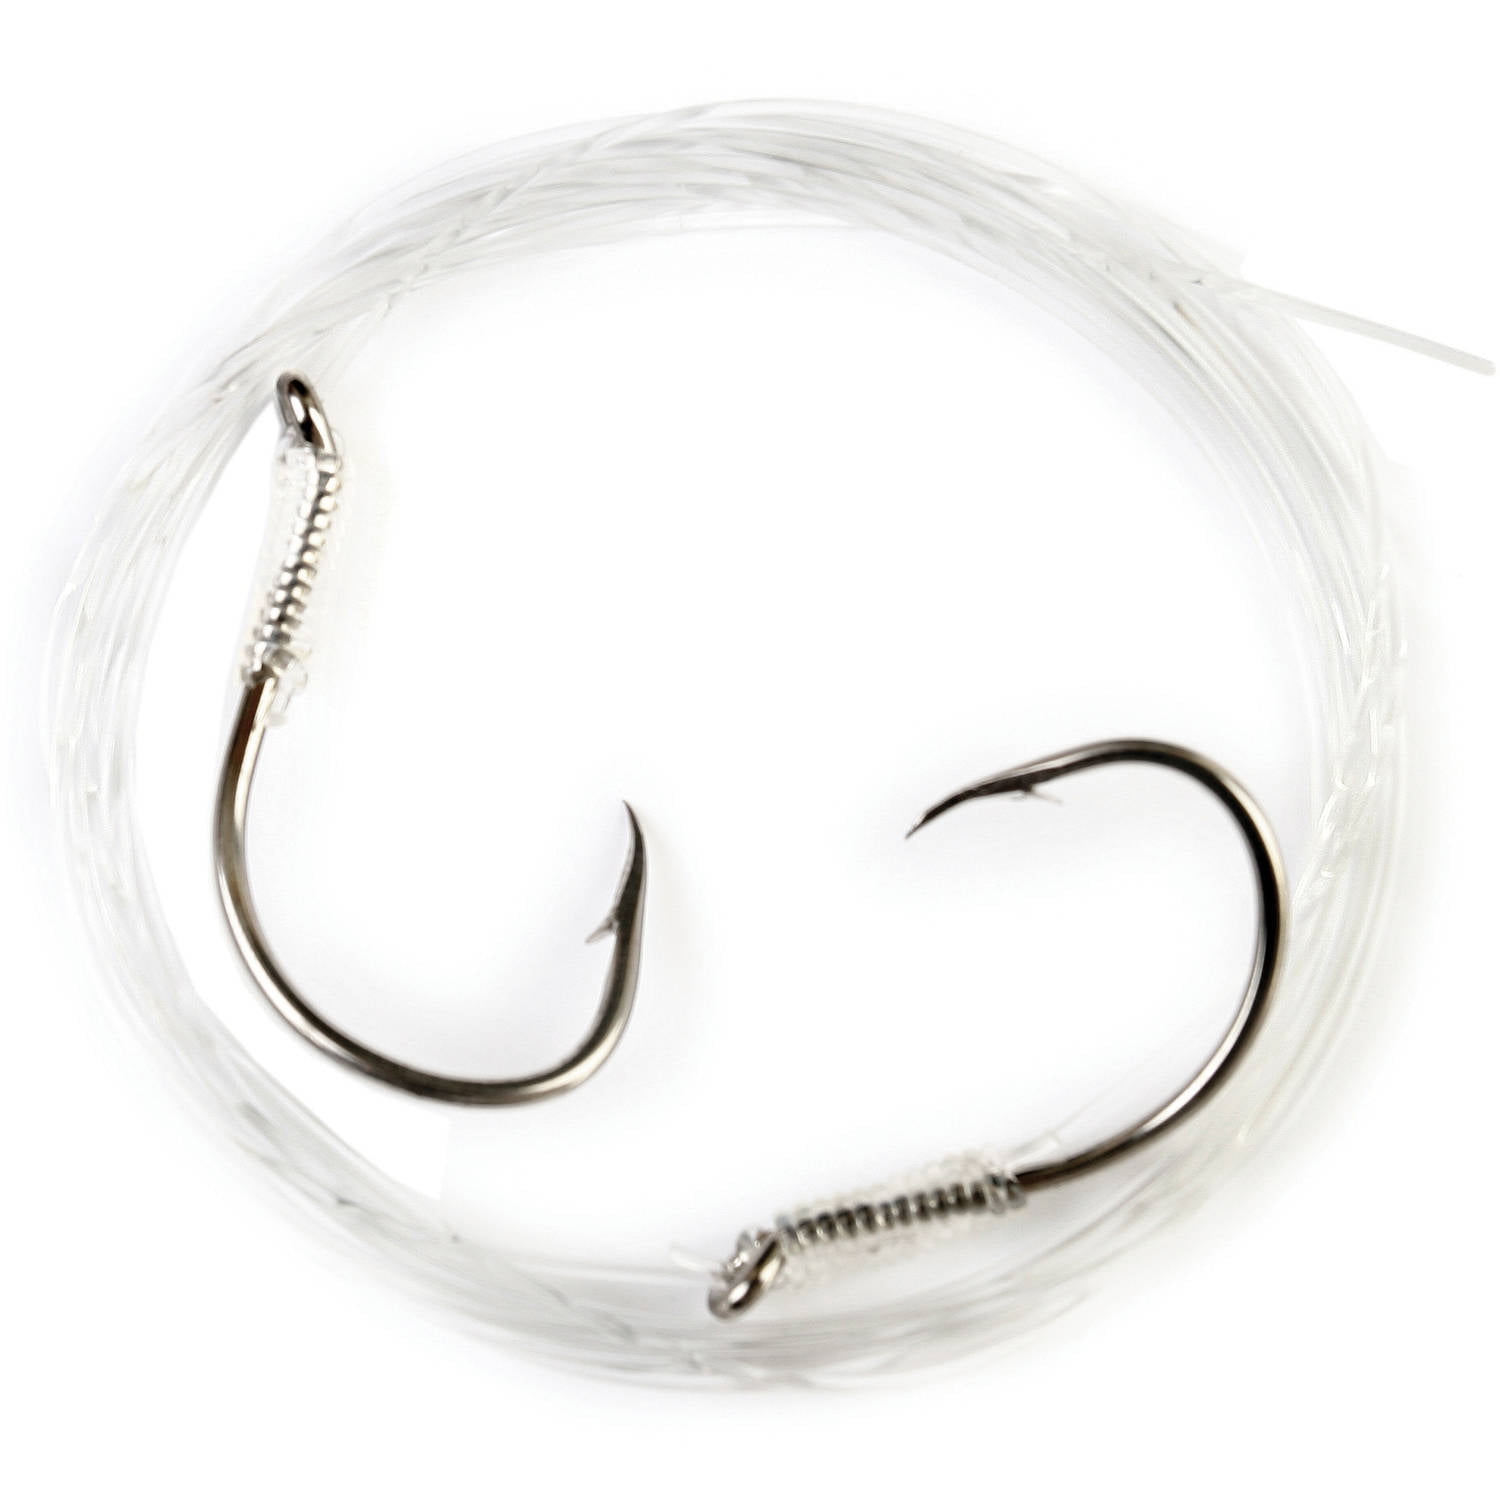 Tyee Salmon Leader Hooks Size 3/0-4/0 and 4/0-5/0 Test Lb 20 and